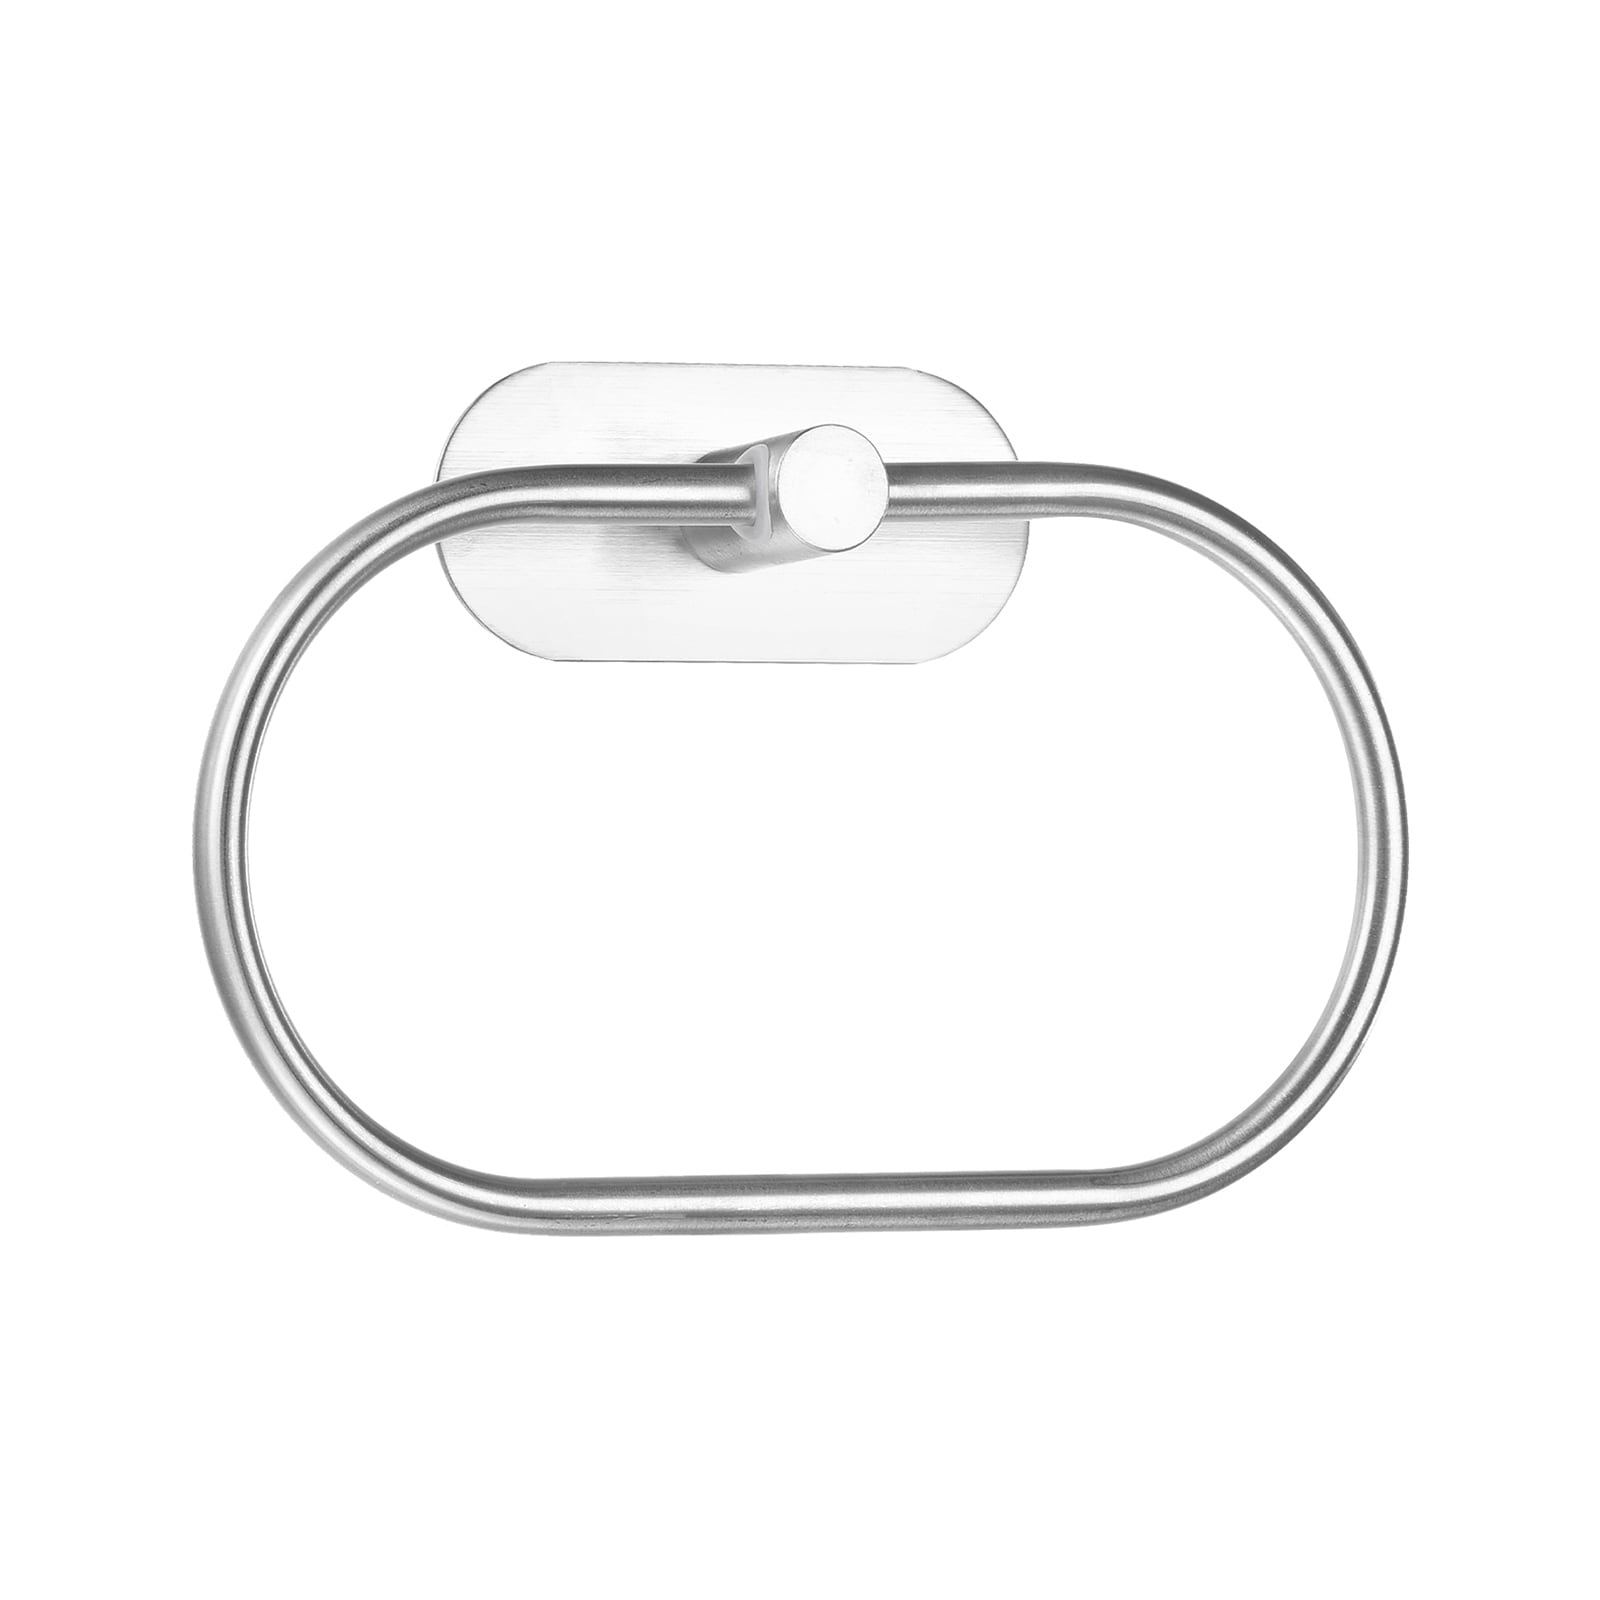 https://ak1.ostkcdn.com/images/products/is/images/direct/92eeeedf0ddaa57a8eafab9928715fba57067550/Self-Adhesive-Towel-Ring-Wall-Mounted-Oval-Towel-Hanger-Holder%2C-Silver-Tone.jpg